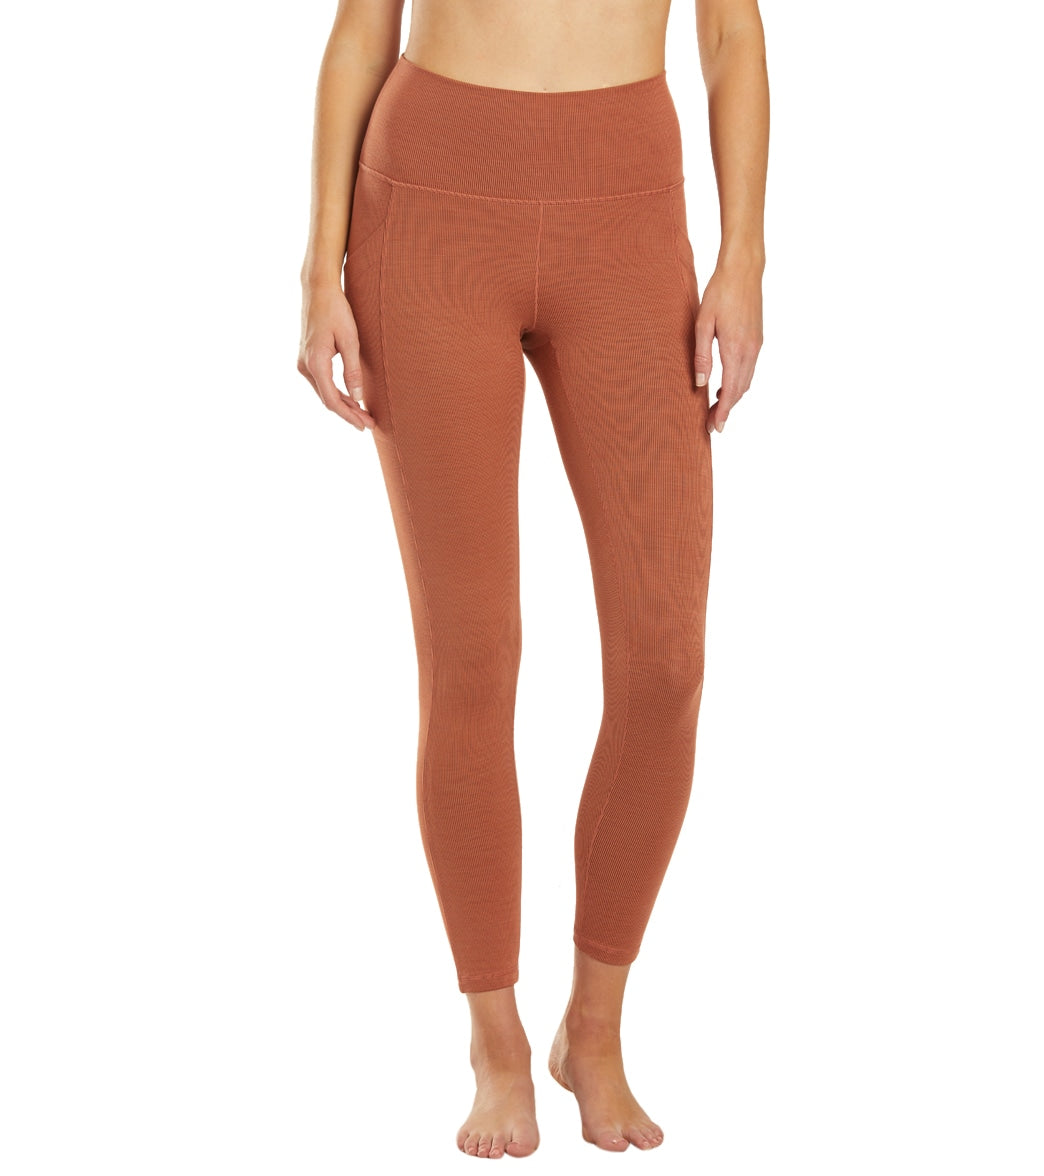 Becksa 7/8 Legging - Morning Glory Heather  Discover and Shop Fair Trade  and Sustainable Brands on People Heart Planet